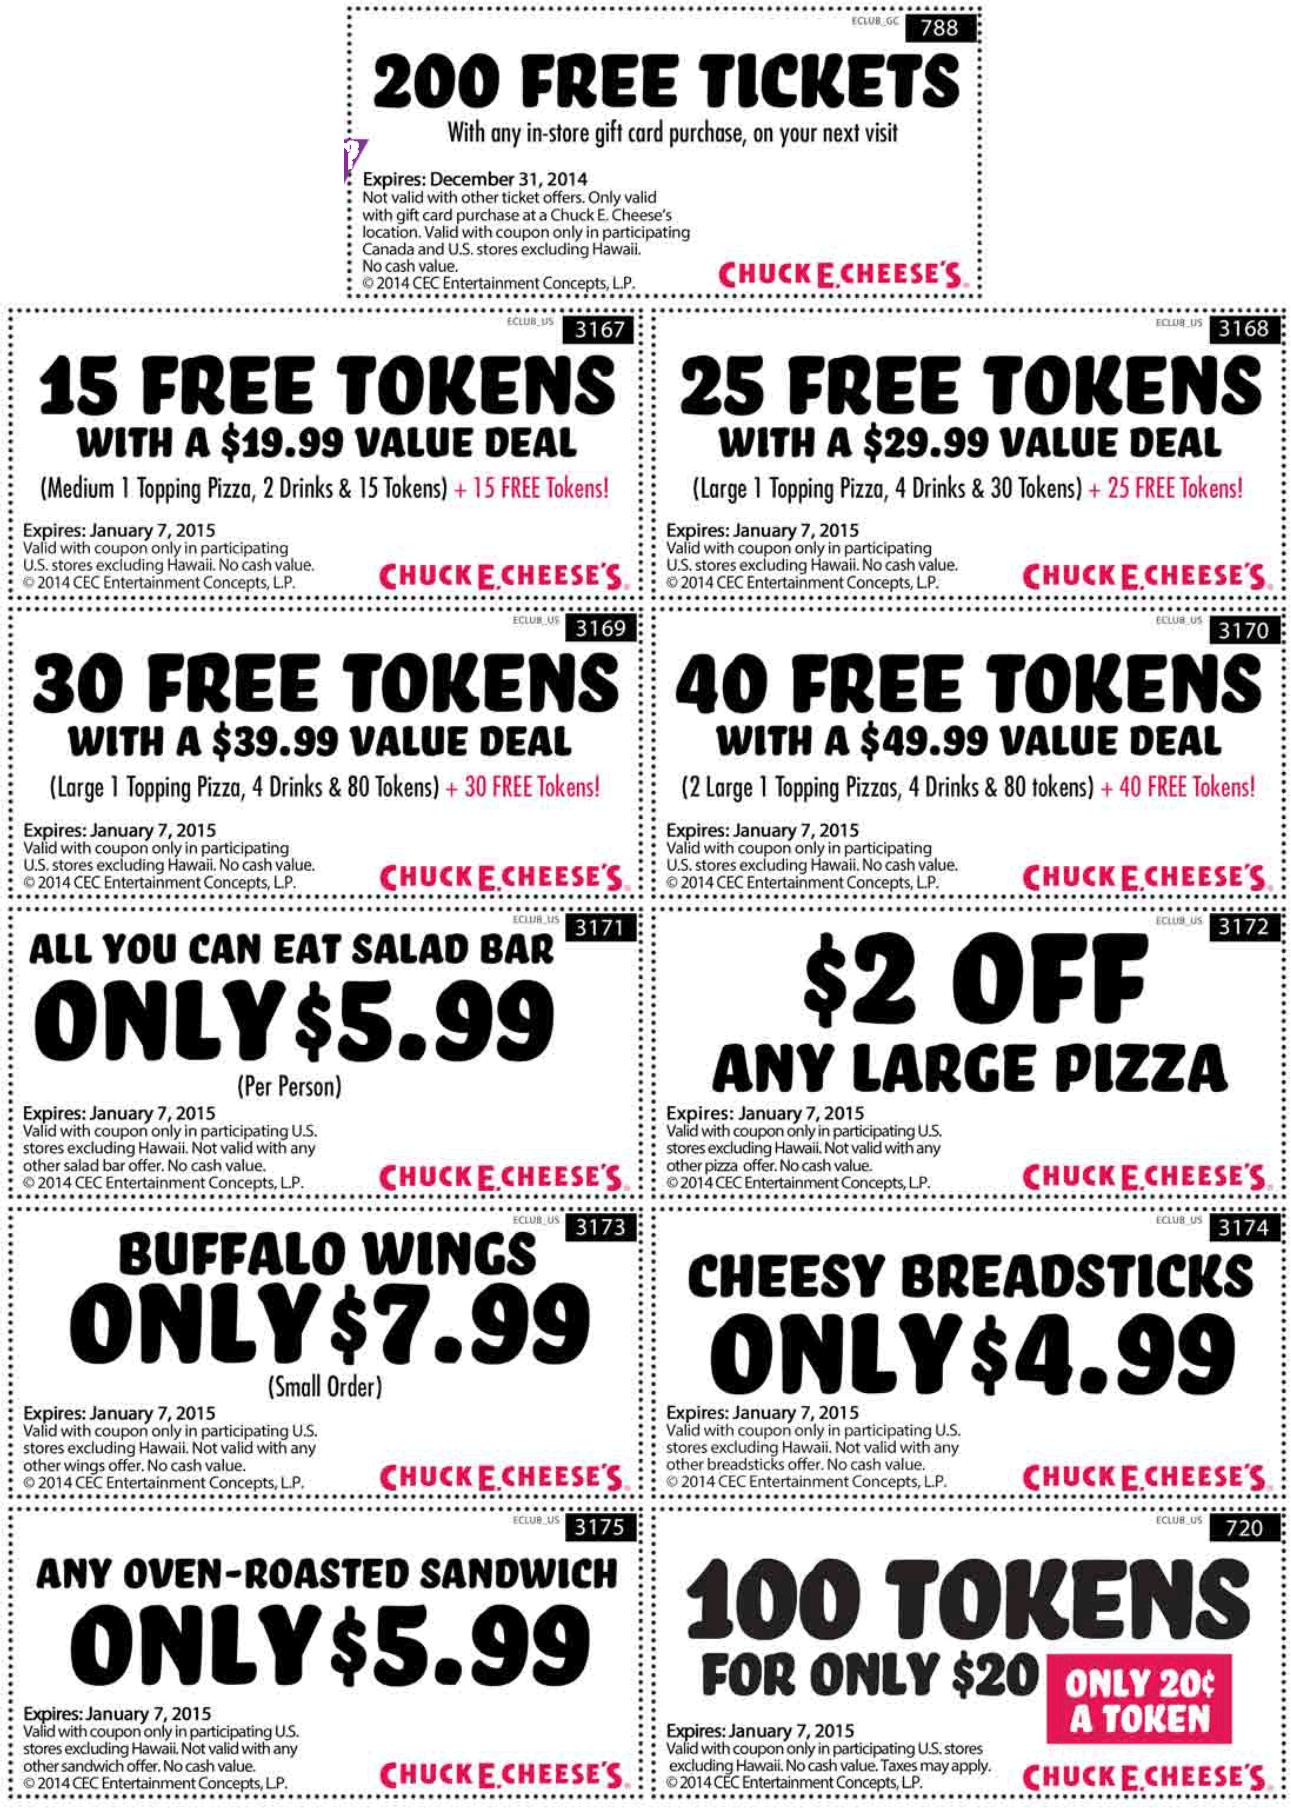 chuck e cheese coupons 100 tokens for $20 2021